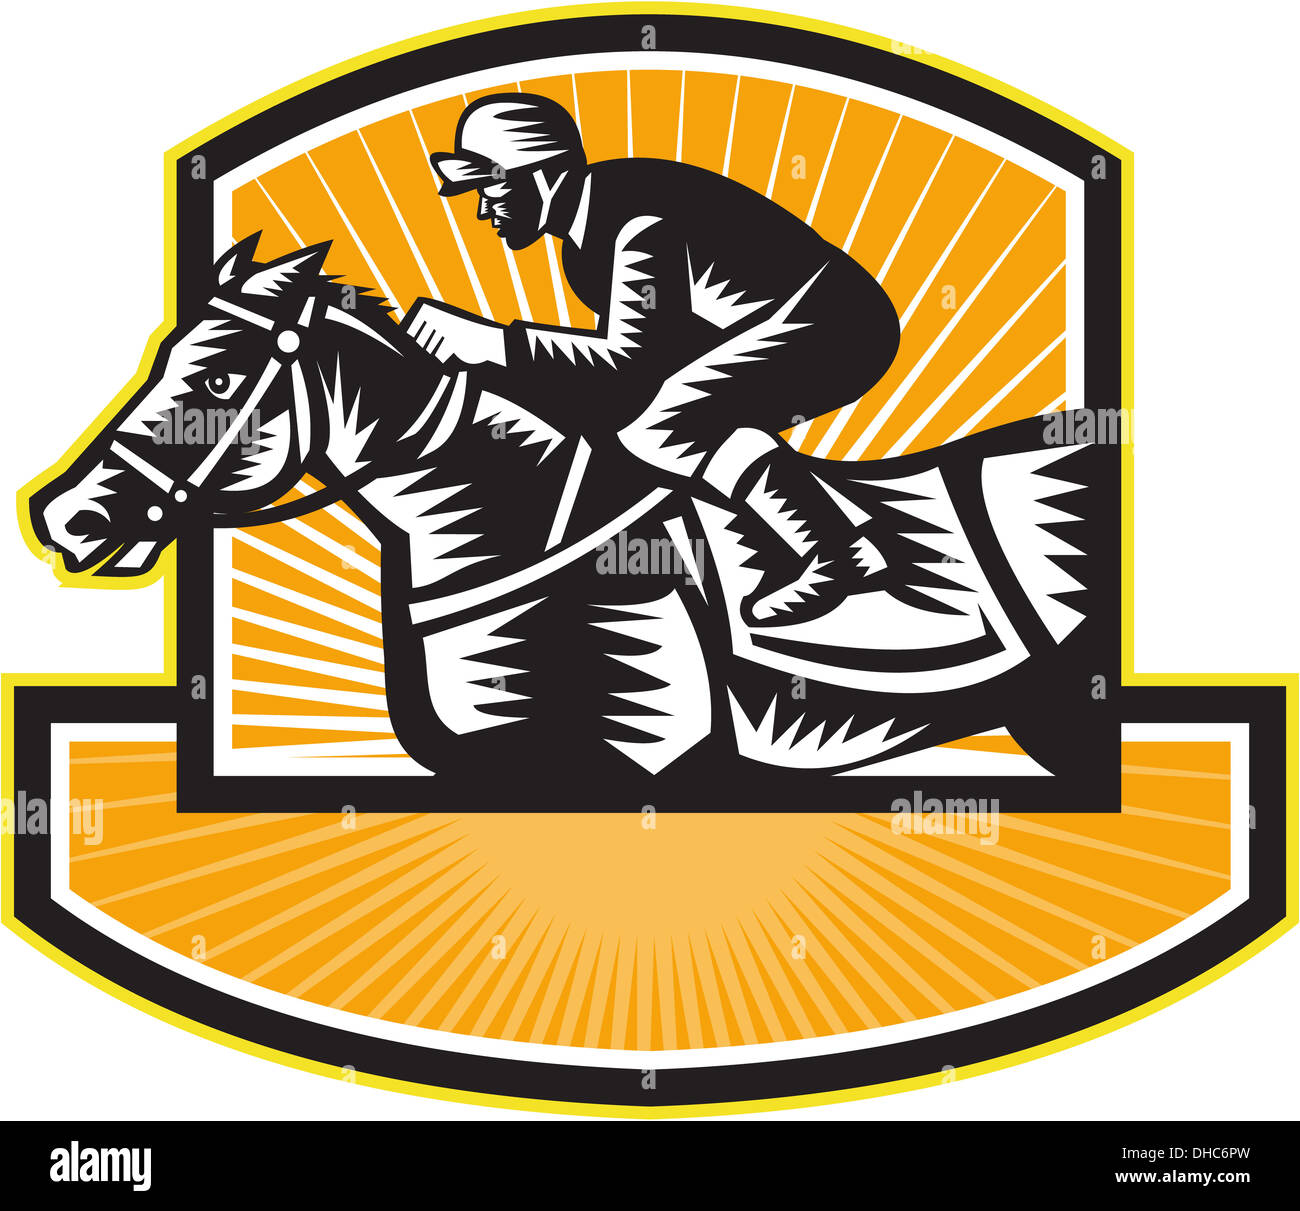 Illustration of a horse and jockey thoroughbred racing viewed from side set inside shield crest on isolated white background done in retro woodcut style. Stock Photo